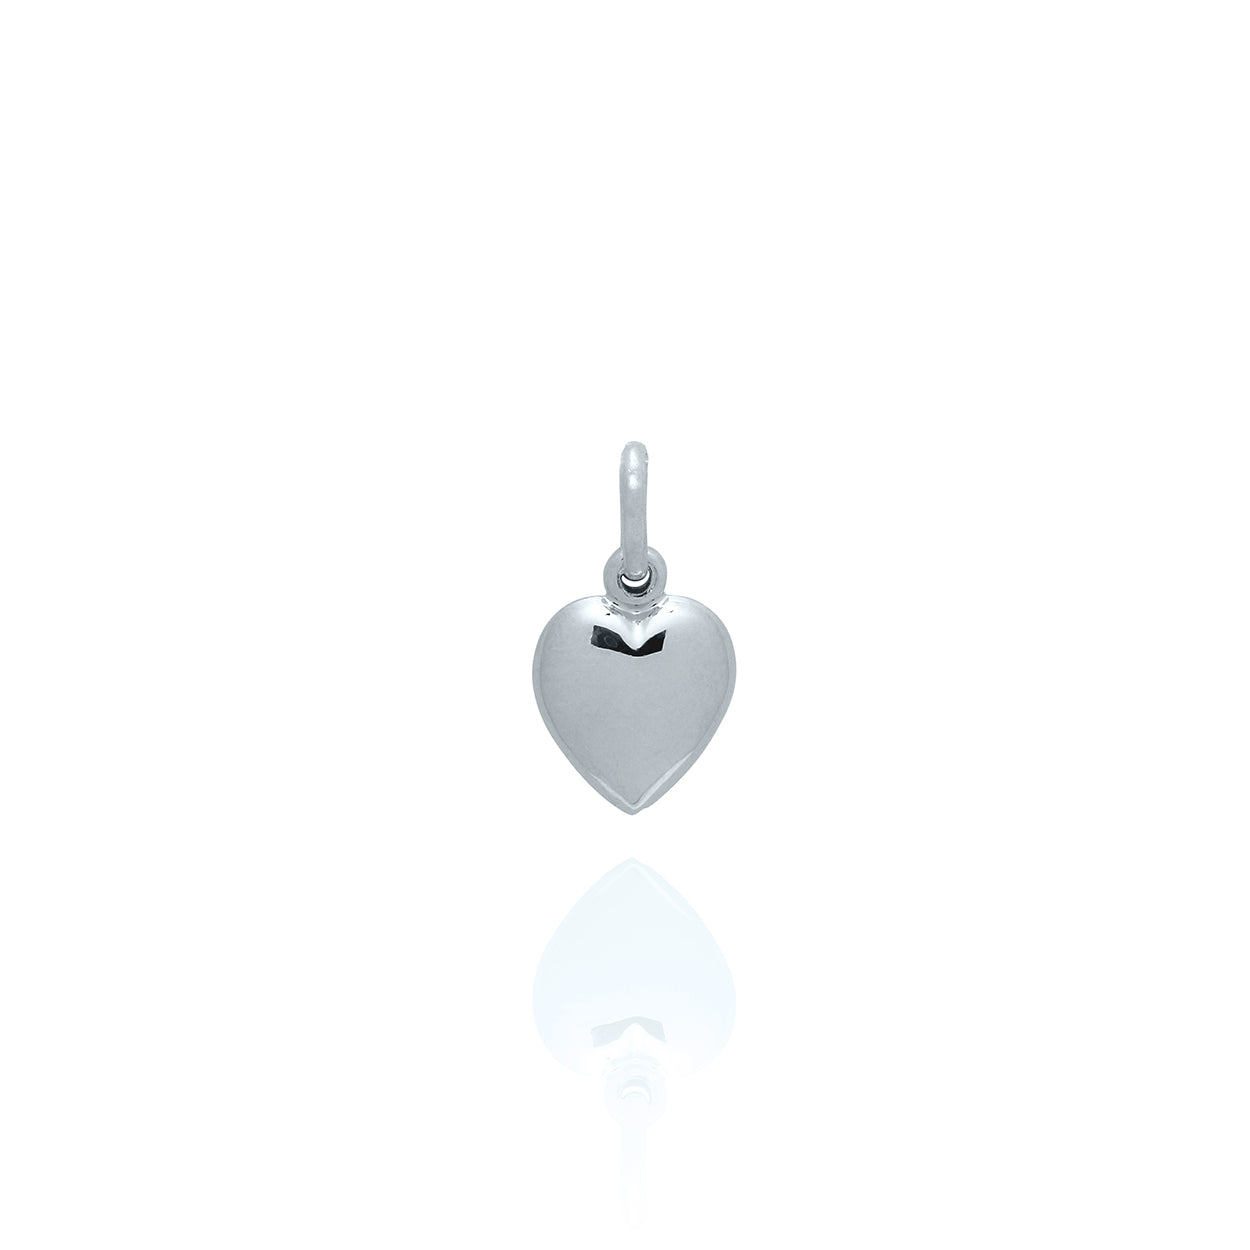 Solid White Gold Heart Pendant Large